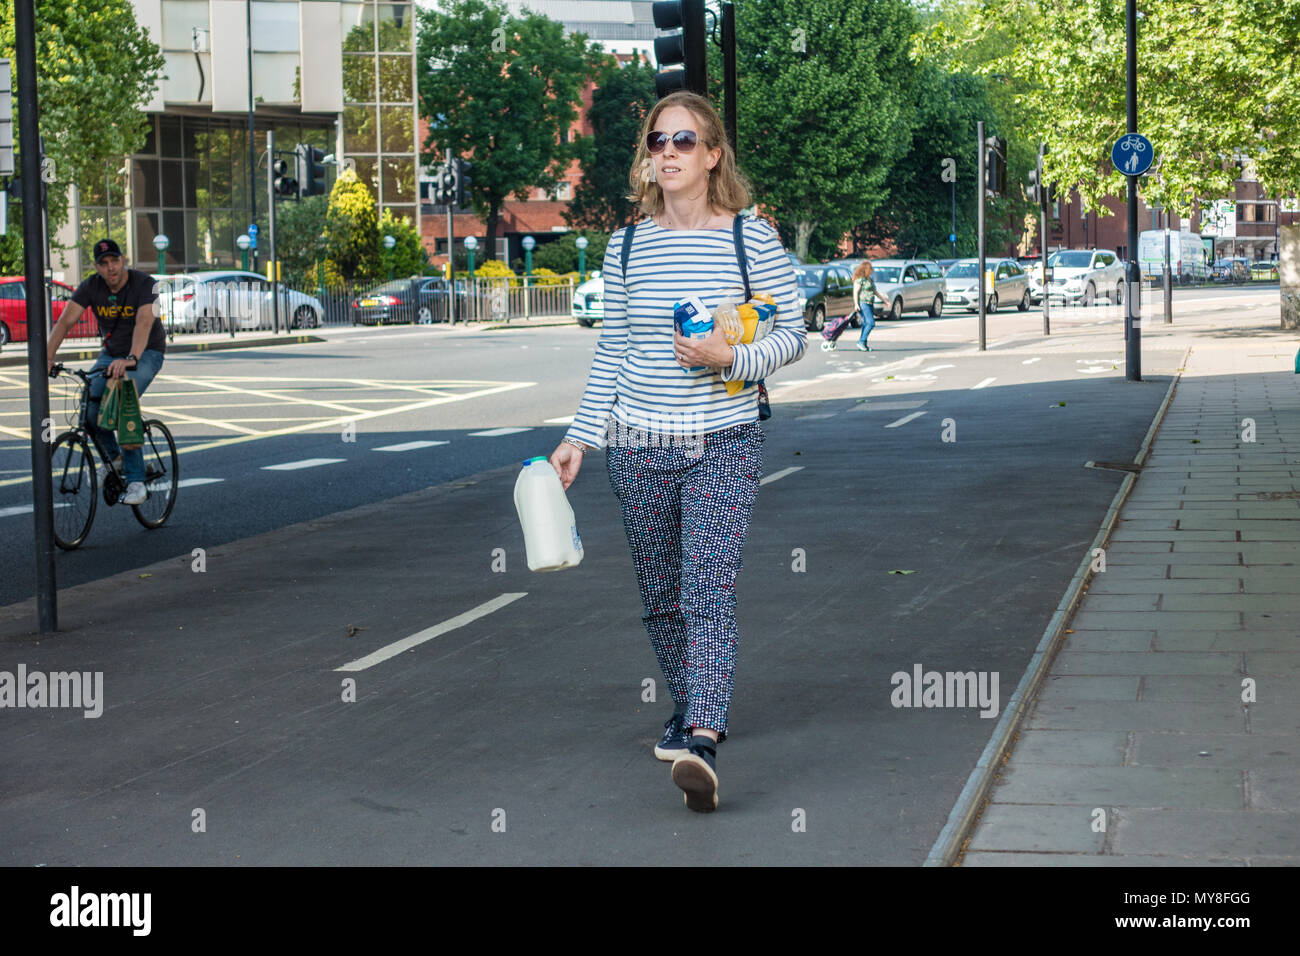 A woman walking through the streets carrying some recently purchased groceries. Stock Photo